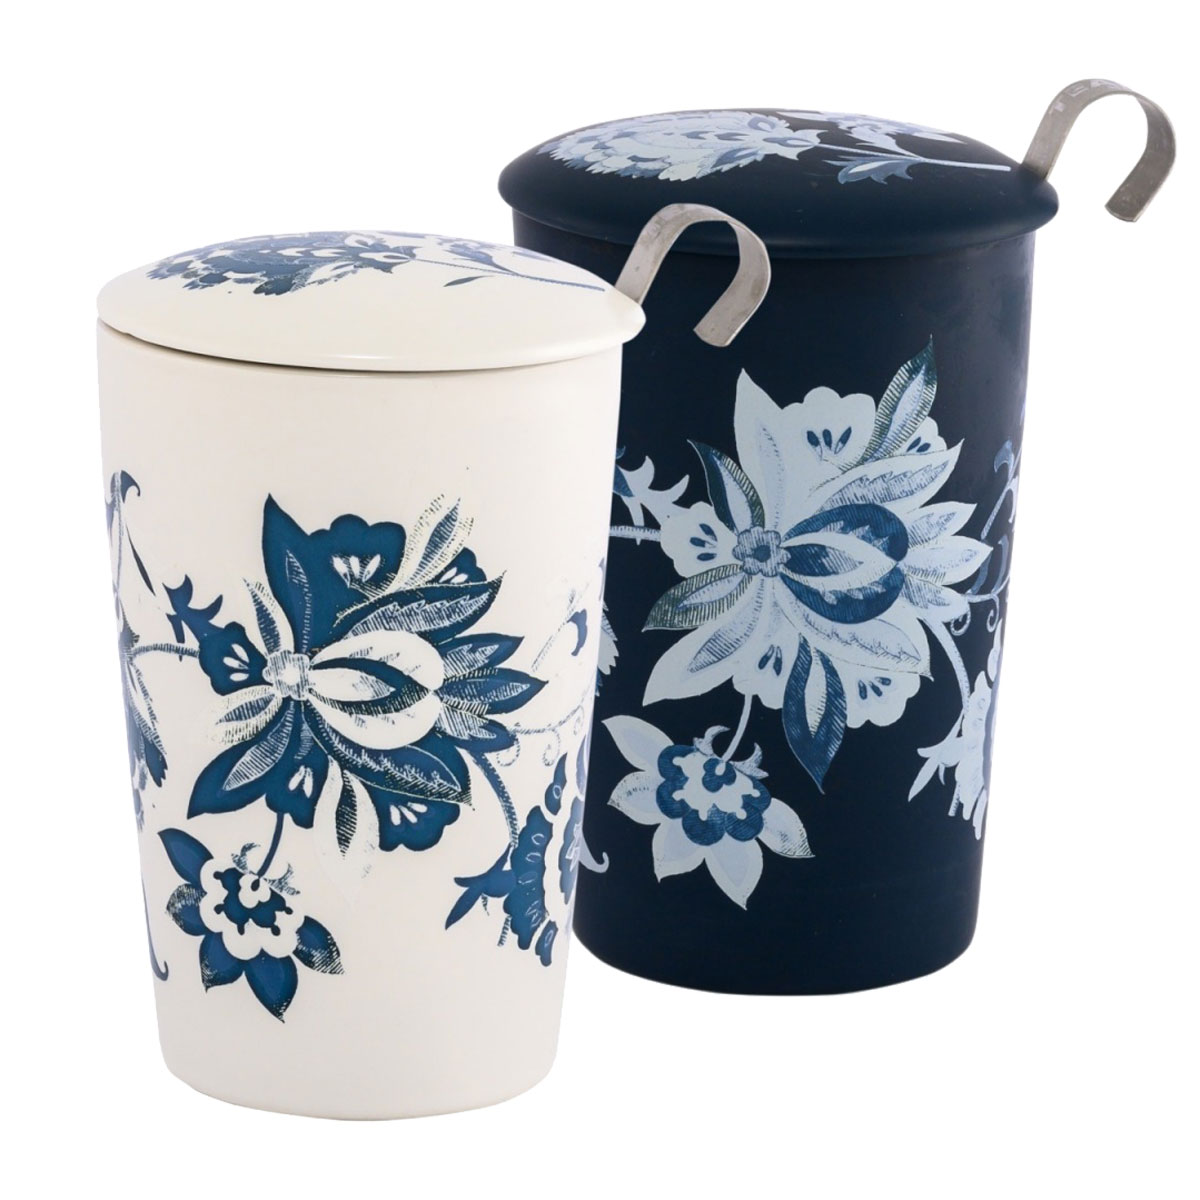 Double-walled porcelain mug with infuser